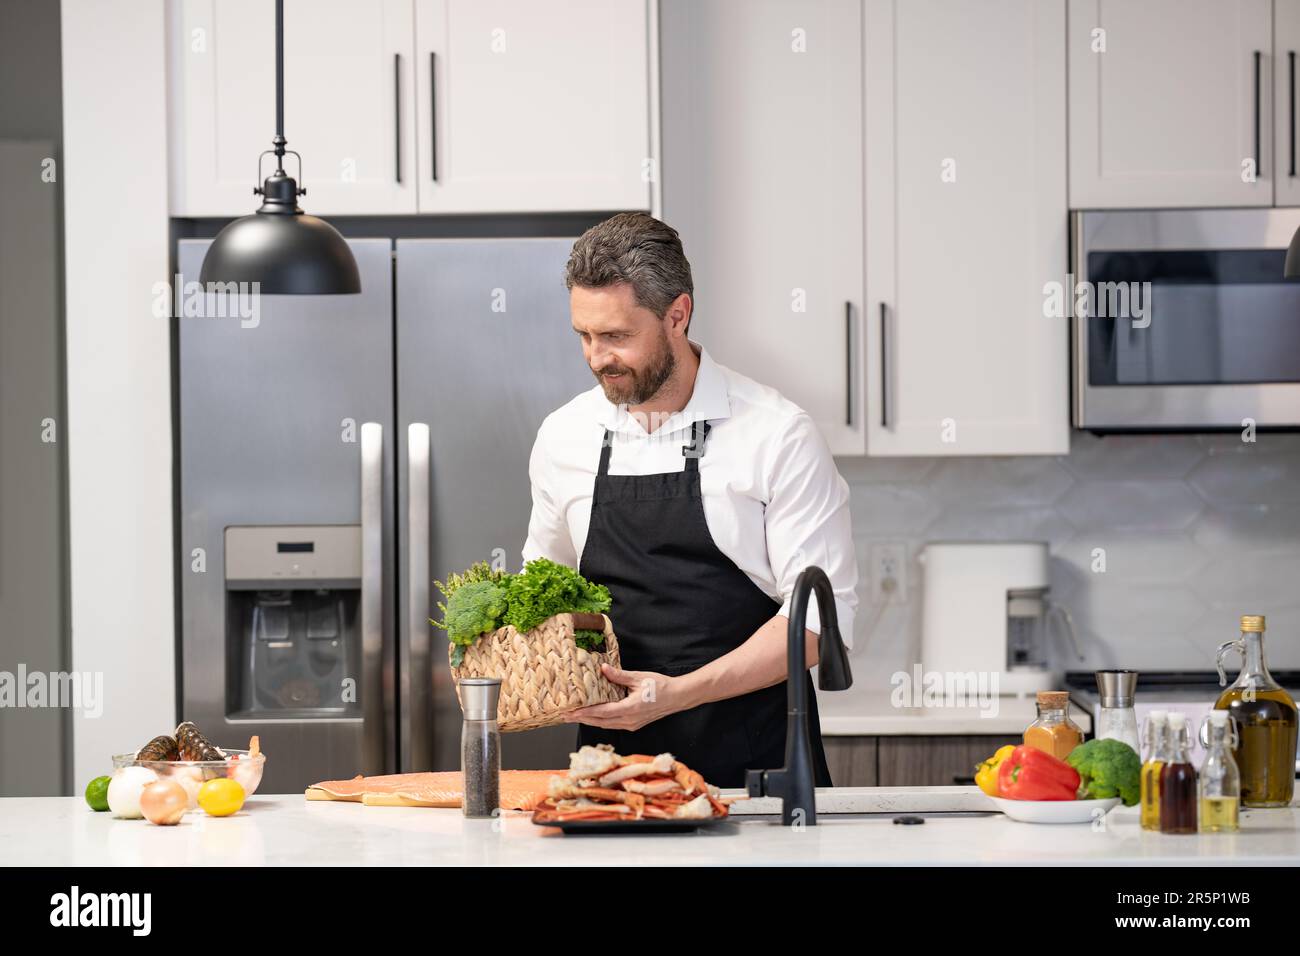 photo of man cooking healthy food. man cooking healthy food. man cooking healthy food wearing apron. man cooking healthy food in the kitchen. Stock Photo